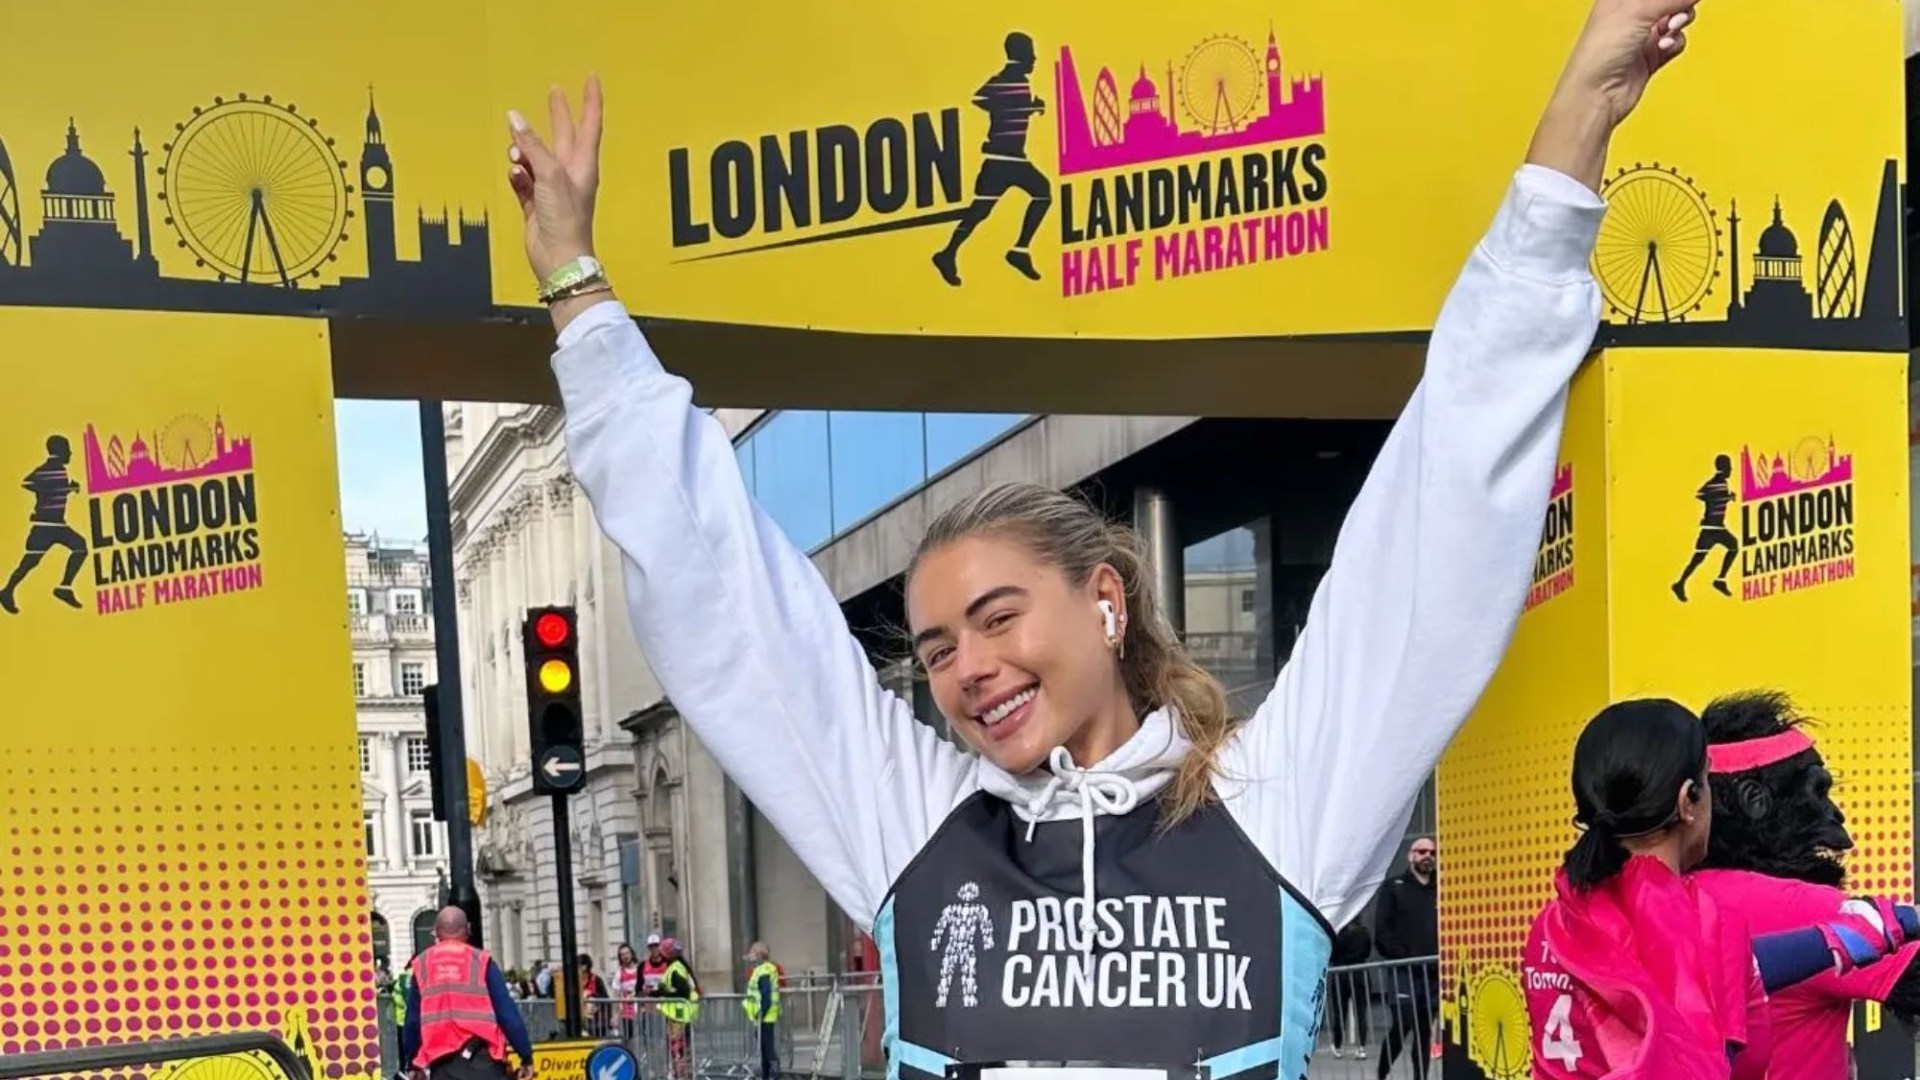 Love Island’s Arabella Chi Shines with Strictly, This Morning, and Made in Chelsea Stars in London Half Marathon Spectacular